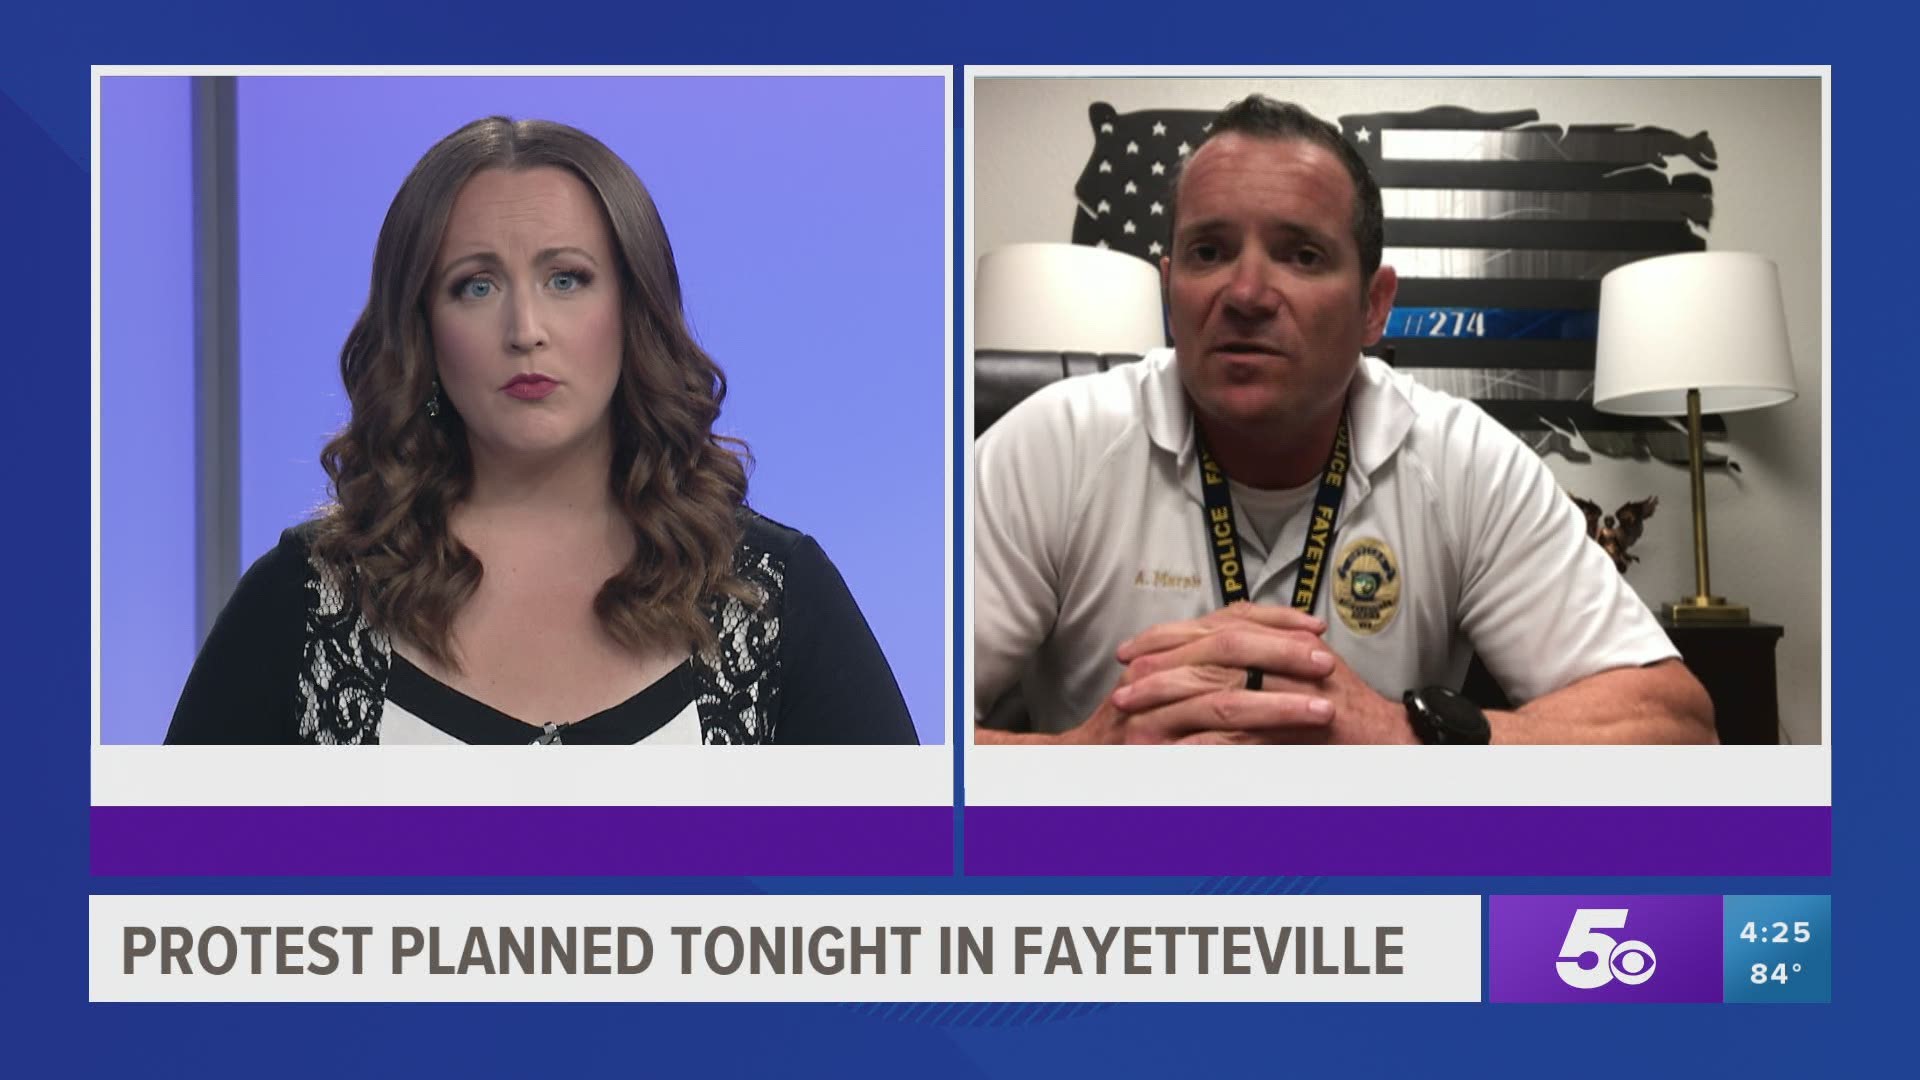 Sgt. Murphy speaks to 5NEWS about Fayetteville protest planned for tonight